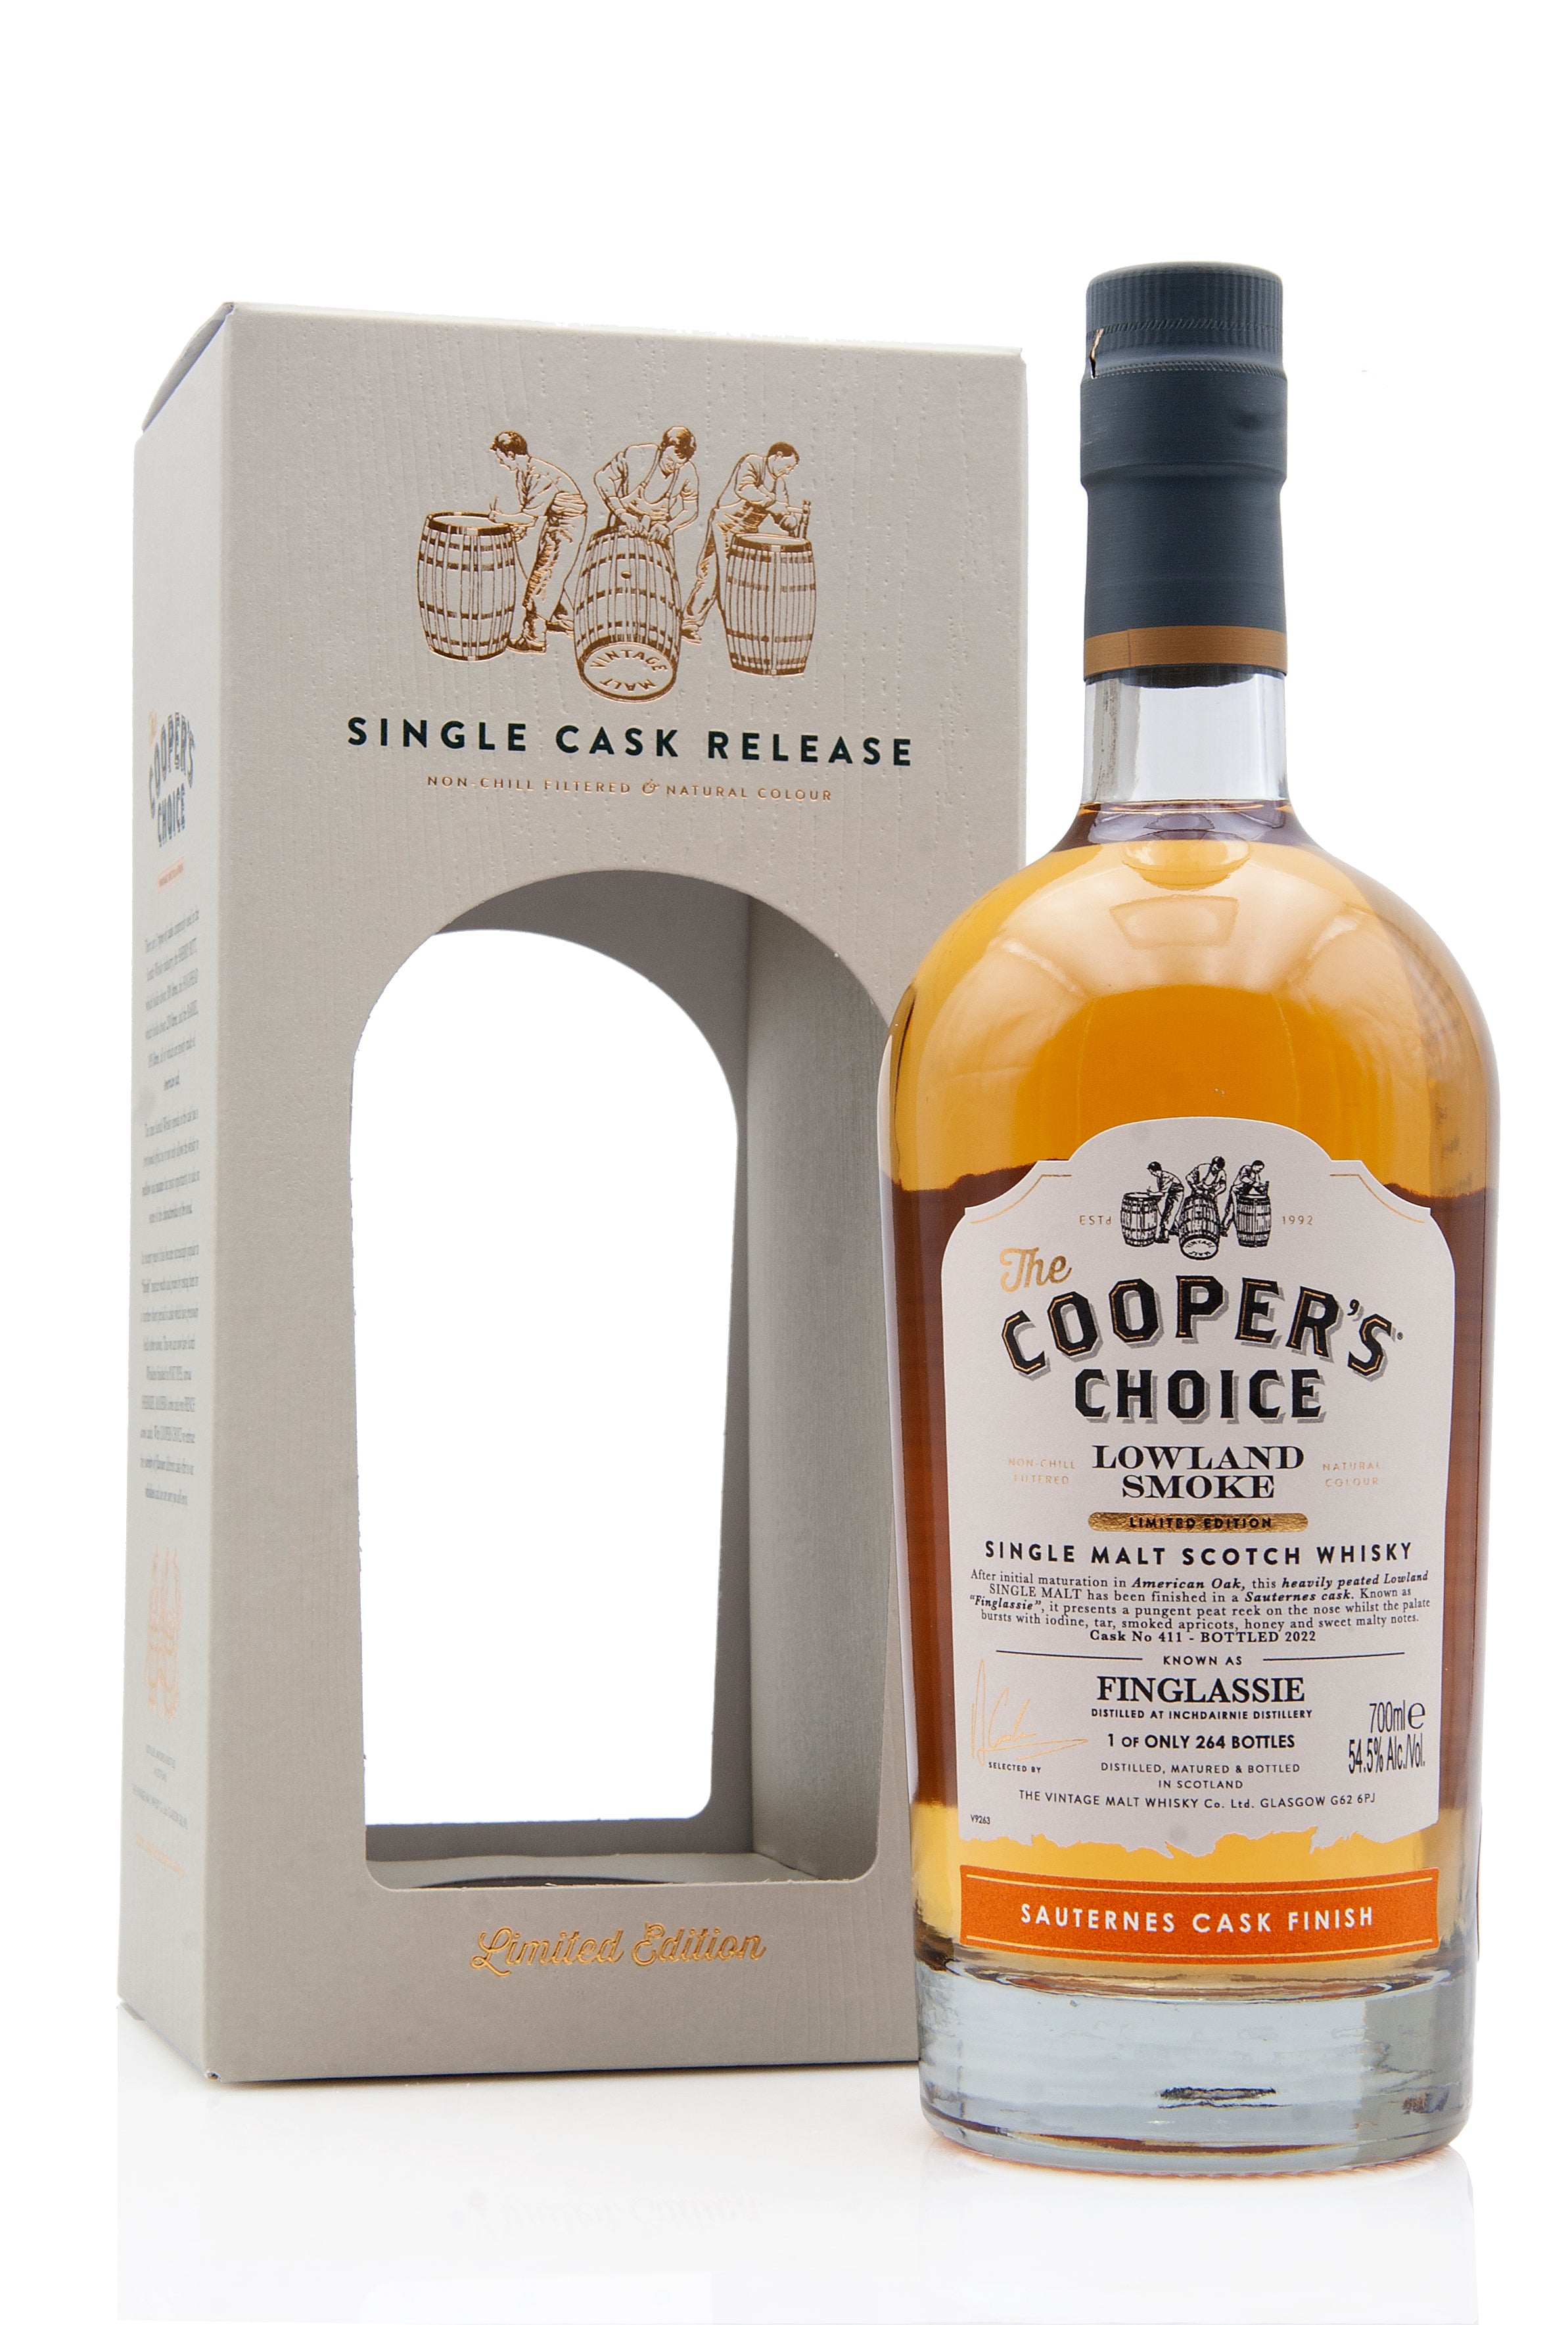 Finglassie 'Lomond Smoke' | Cask 411 | The Cooper's Choice | Abbey Whisky Online